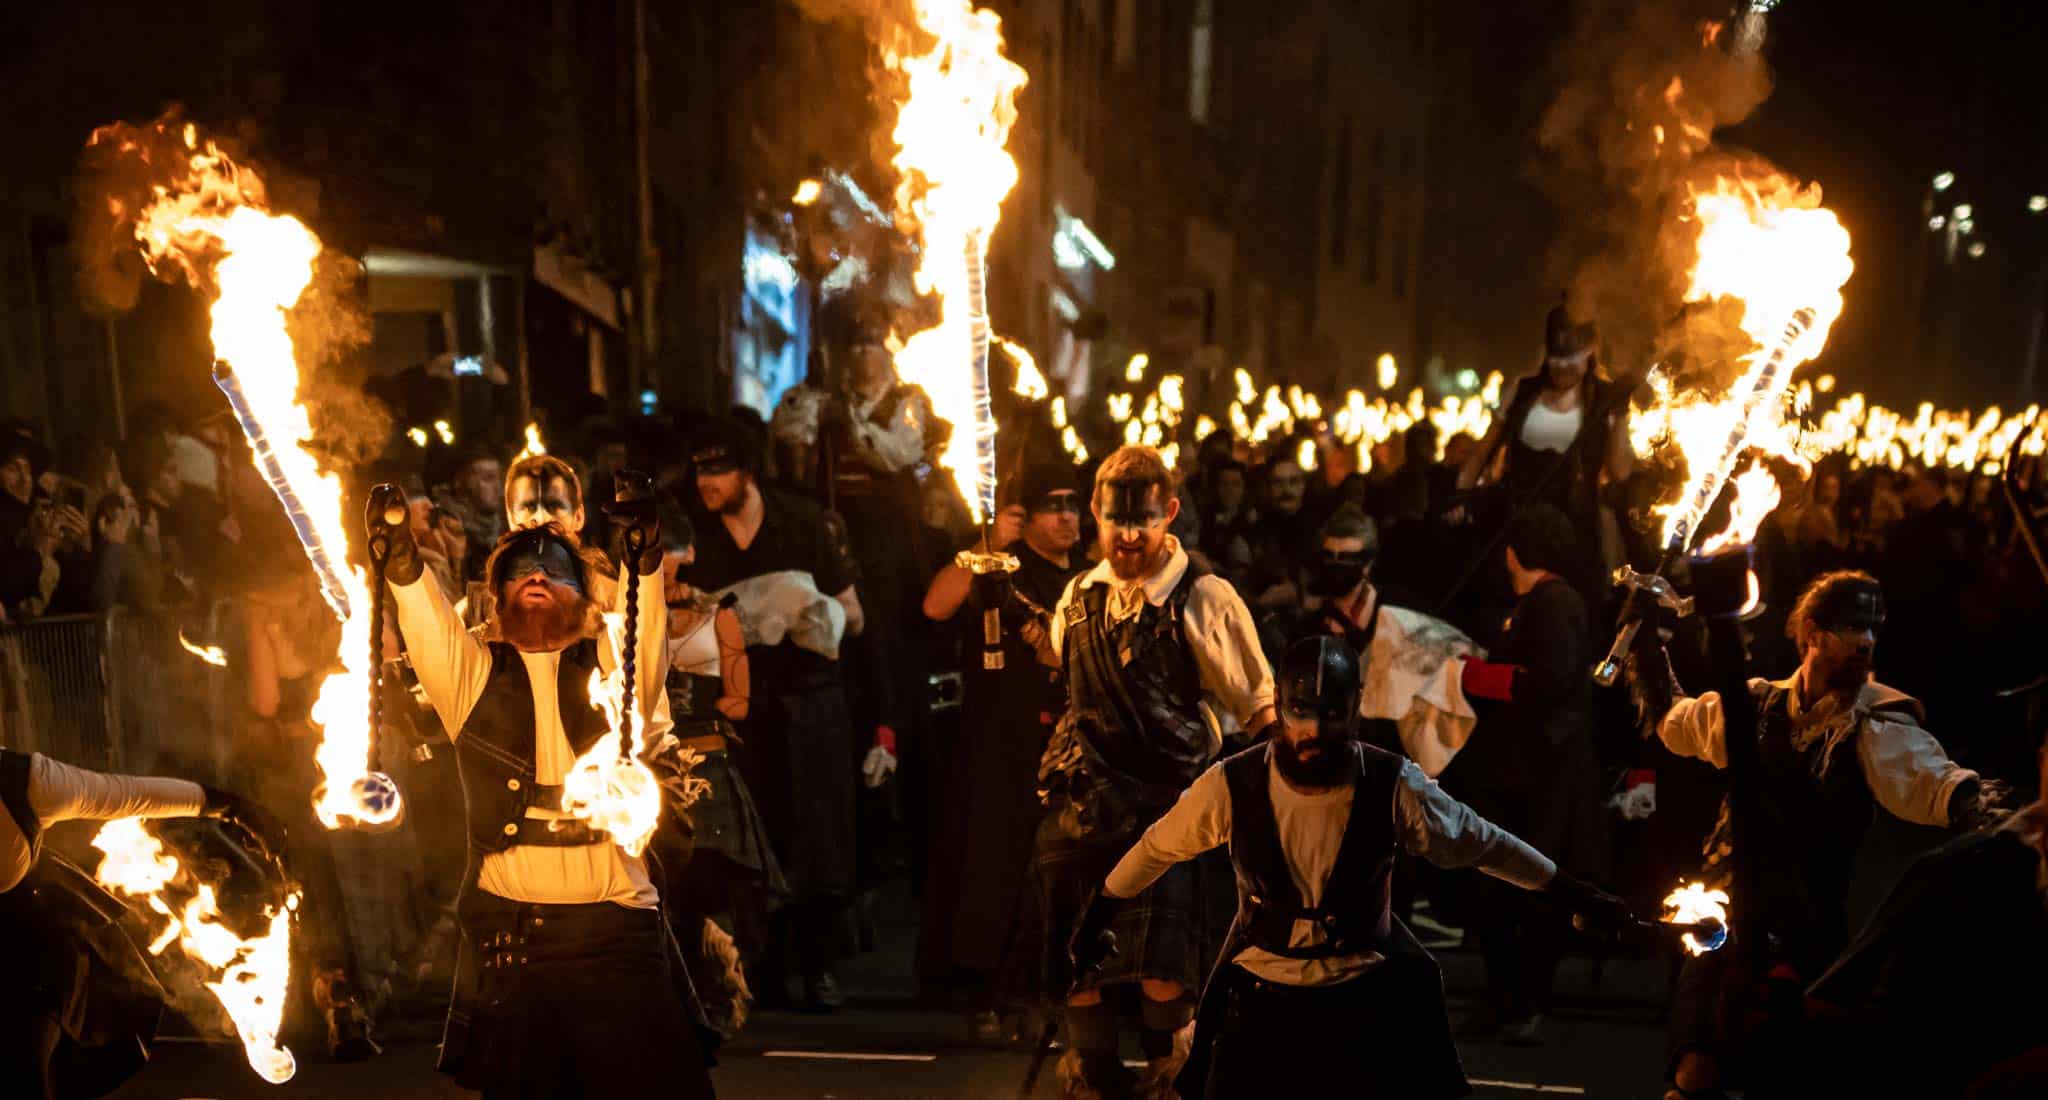 The start of the torchlight procession in Edinburgh